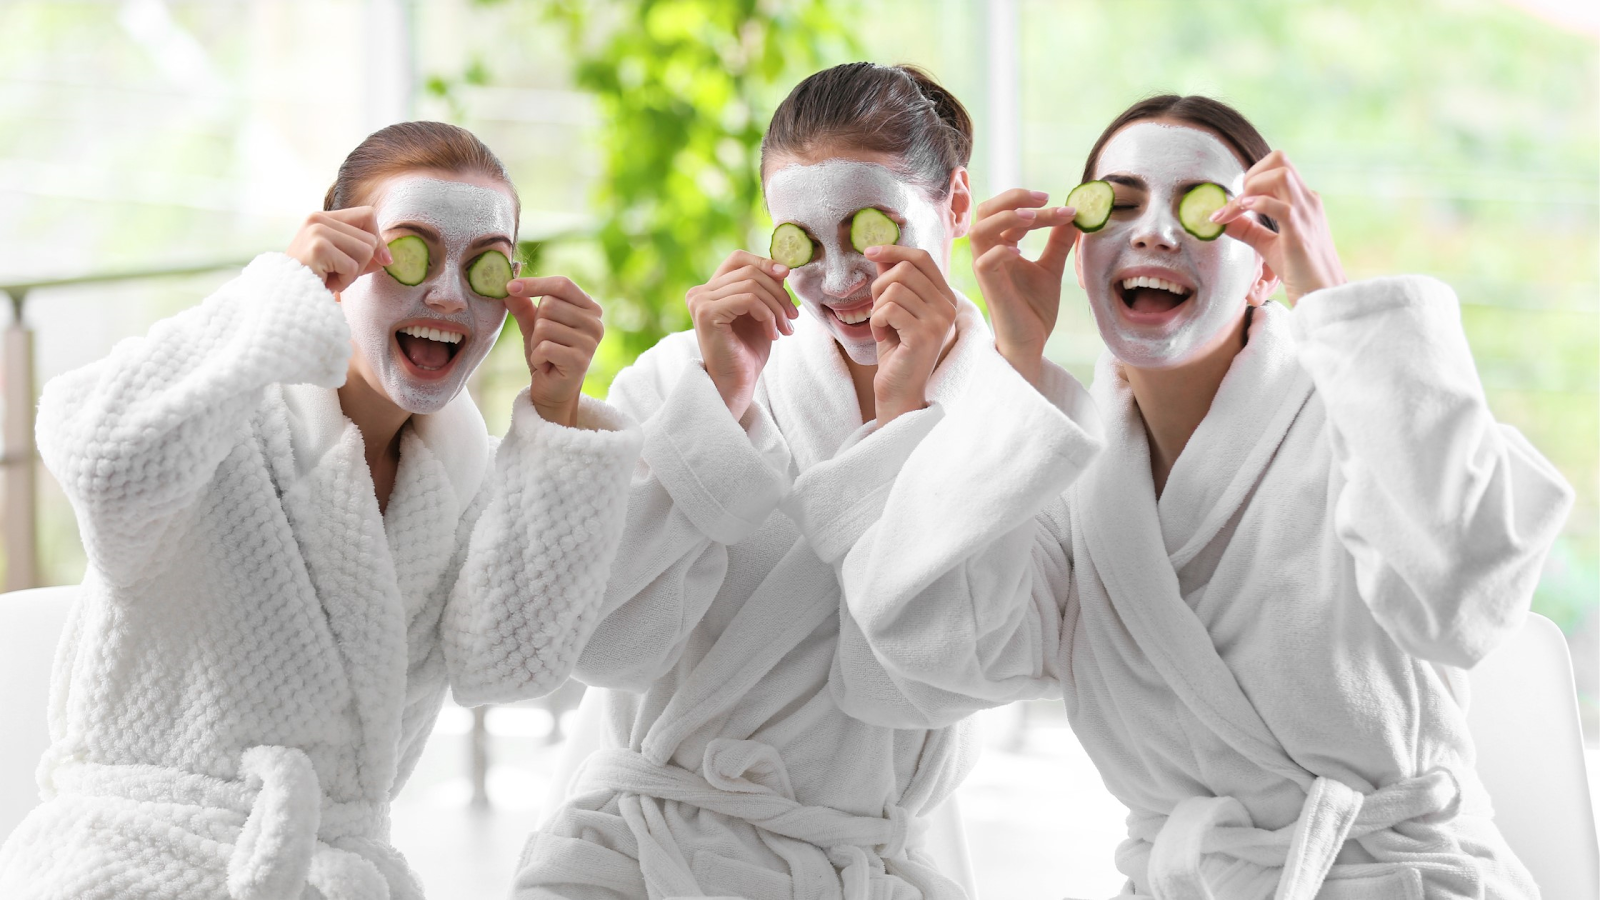 Get facials with your bridal party